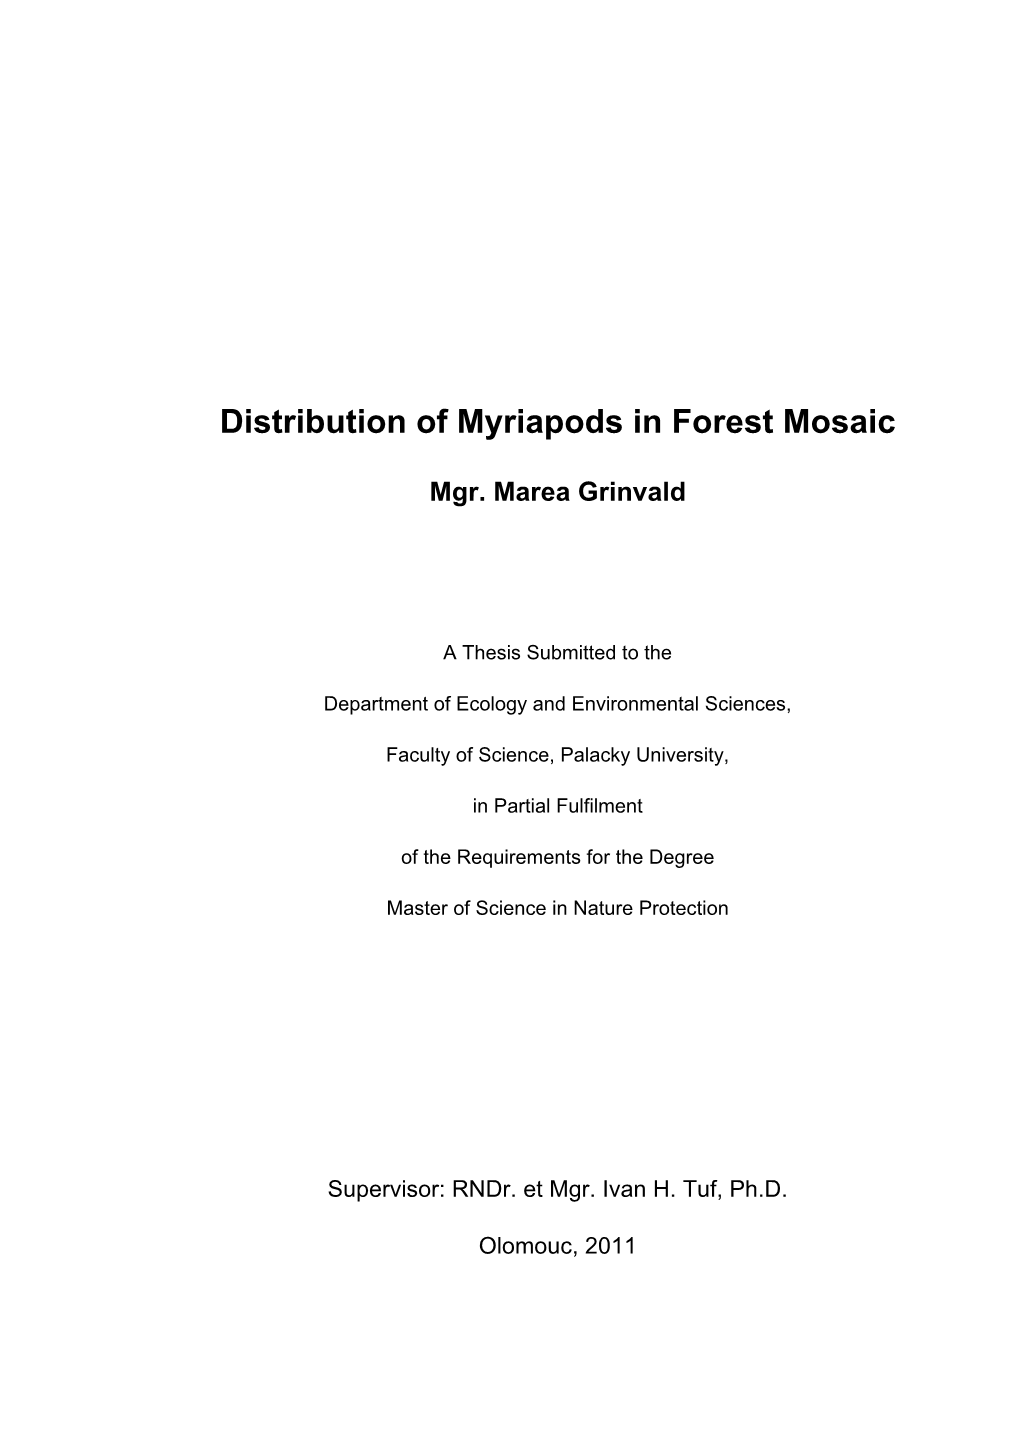 Distribution of Myriapods in Forest Mosaic